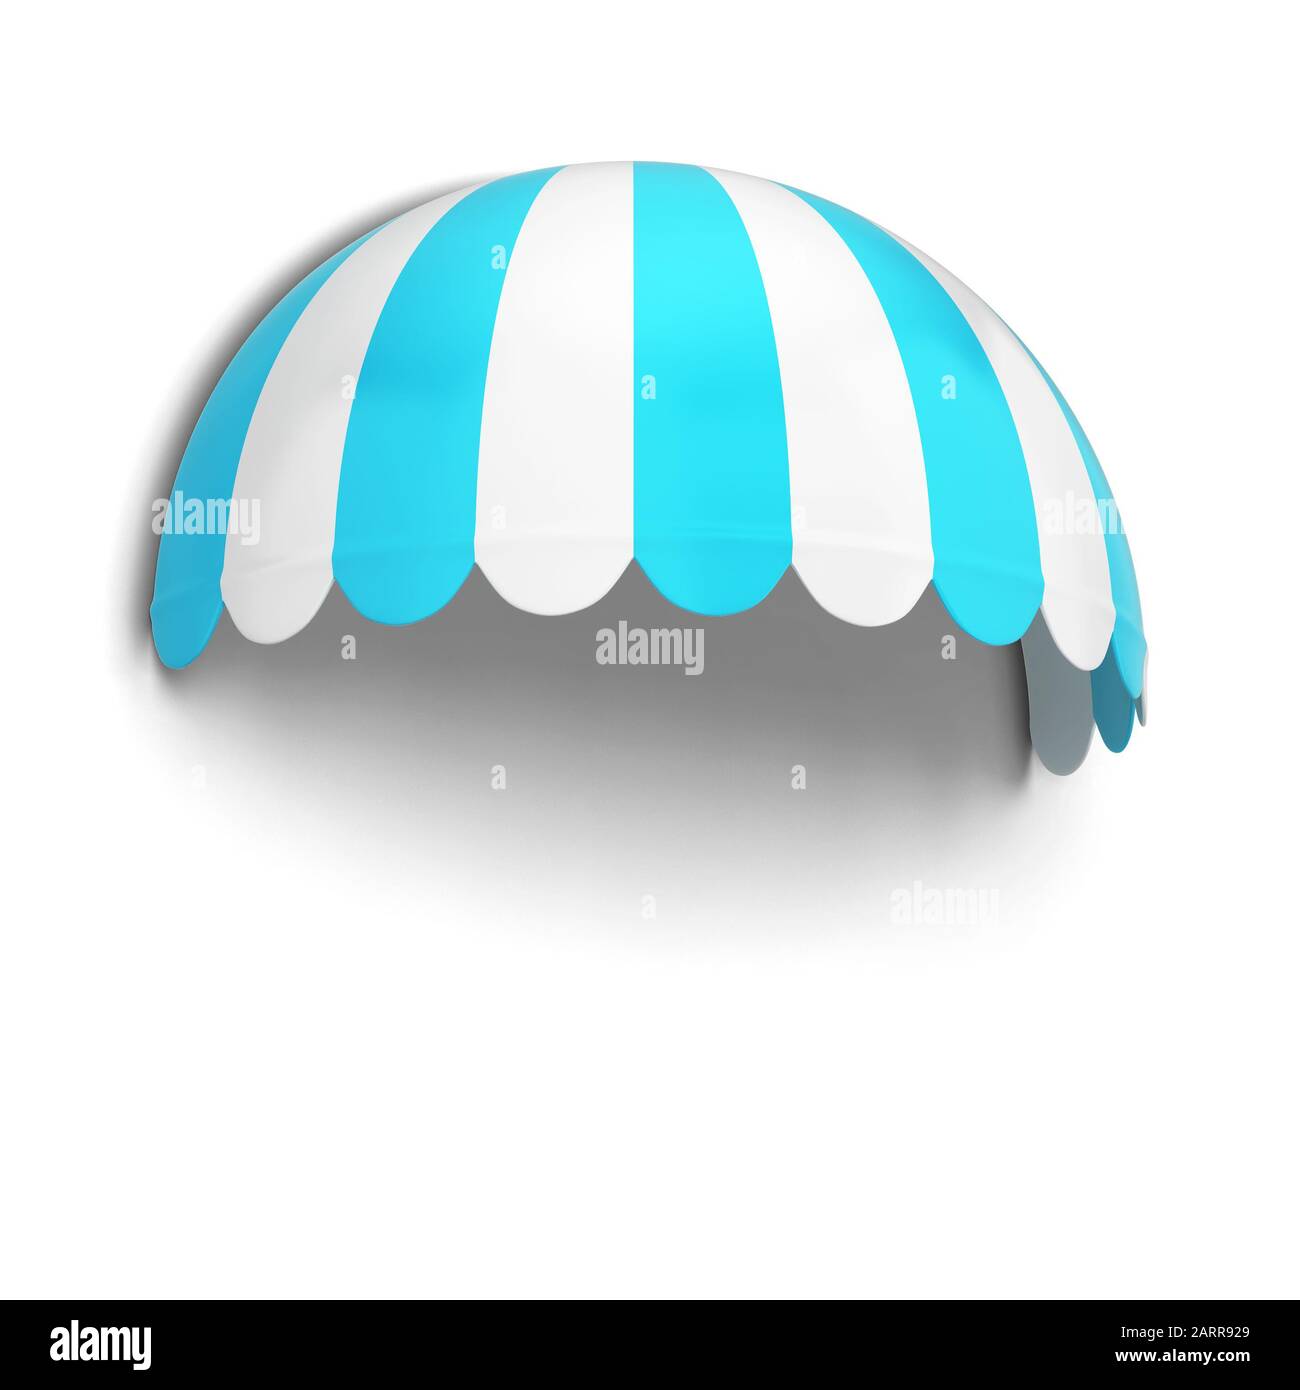 Spherical store awning. 3d illustration isolated on white background Stock Photo